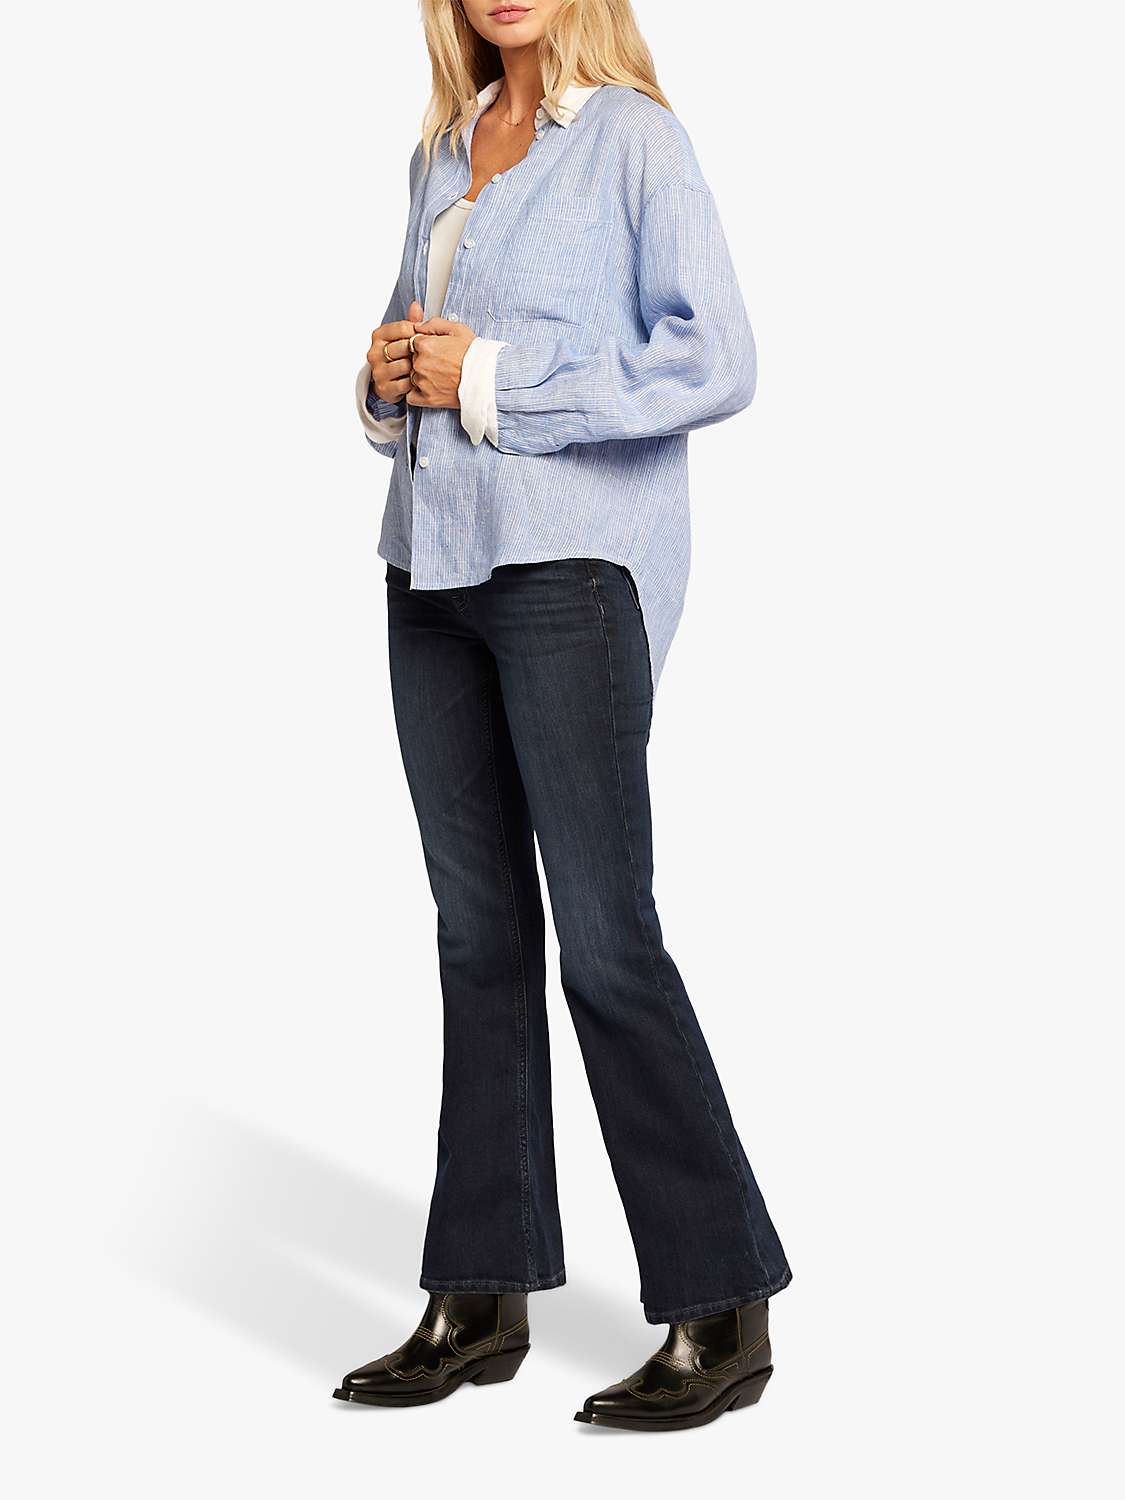 Buy Current/Elliott The Candid Relaxed Fit Linen Shirt, Blue Online at johnlewis.com